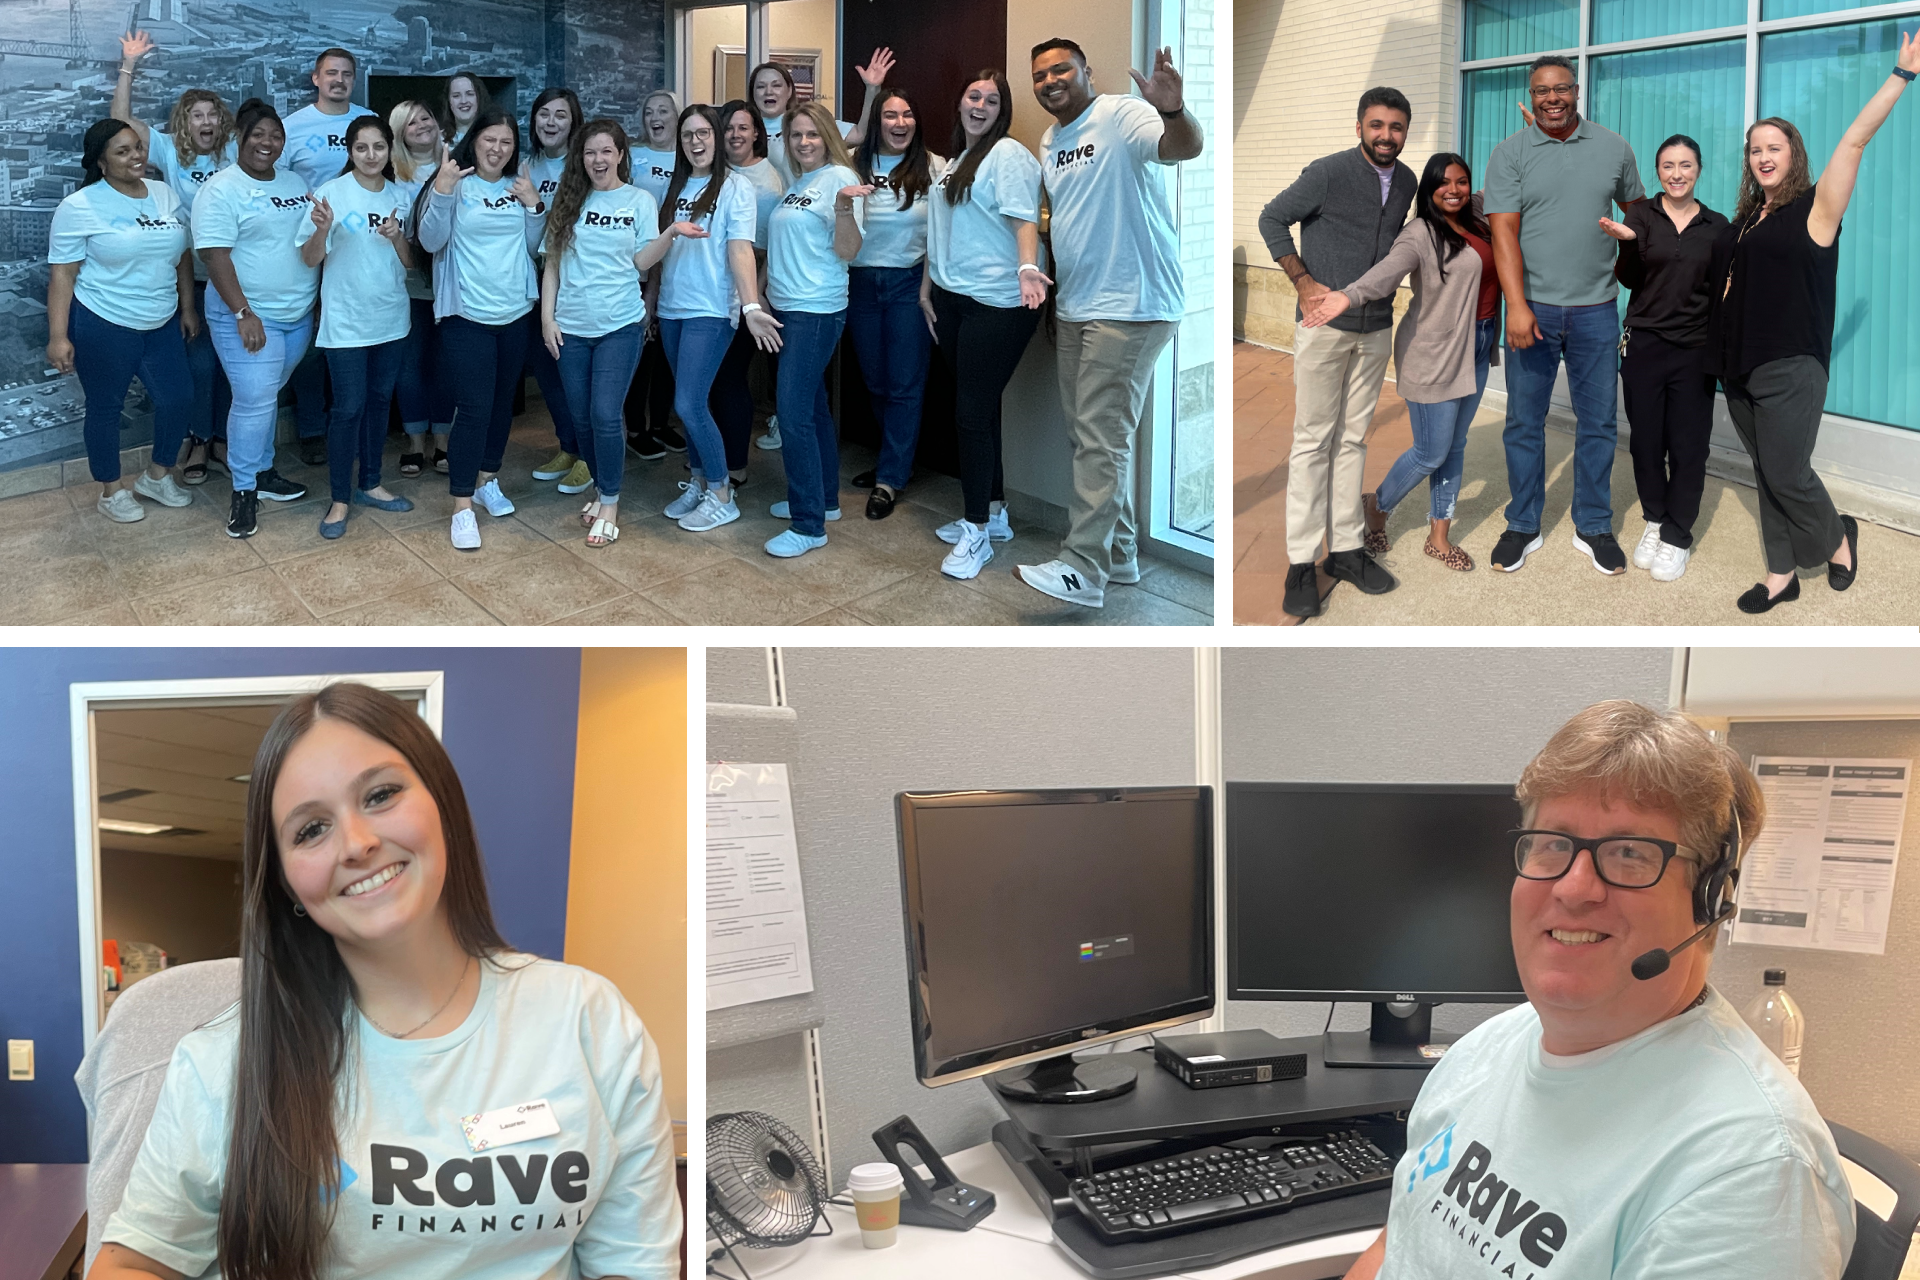 A collage of photos of smiling Rave Financial Employees.